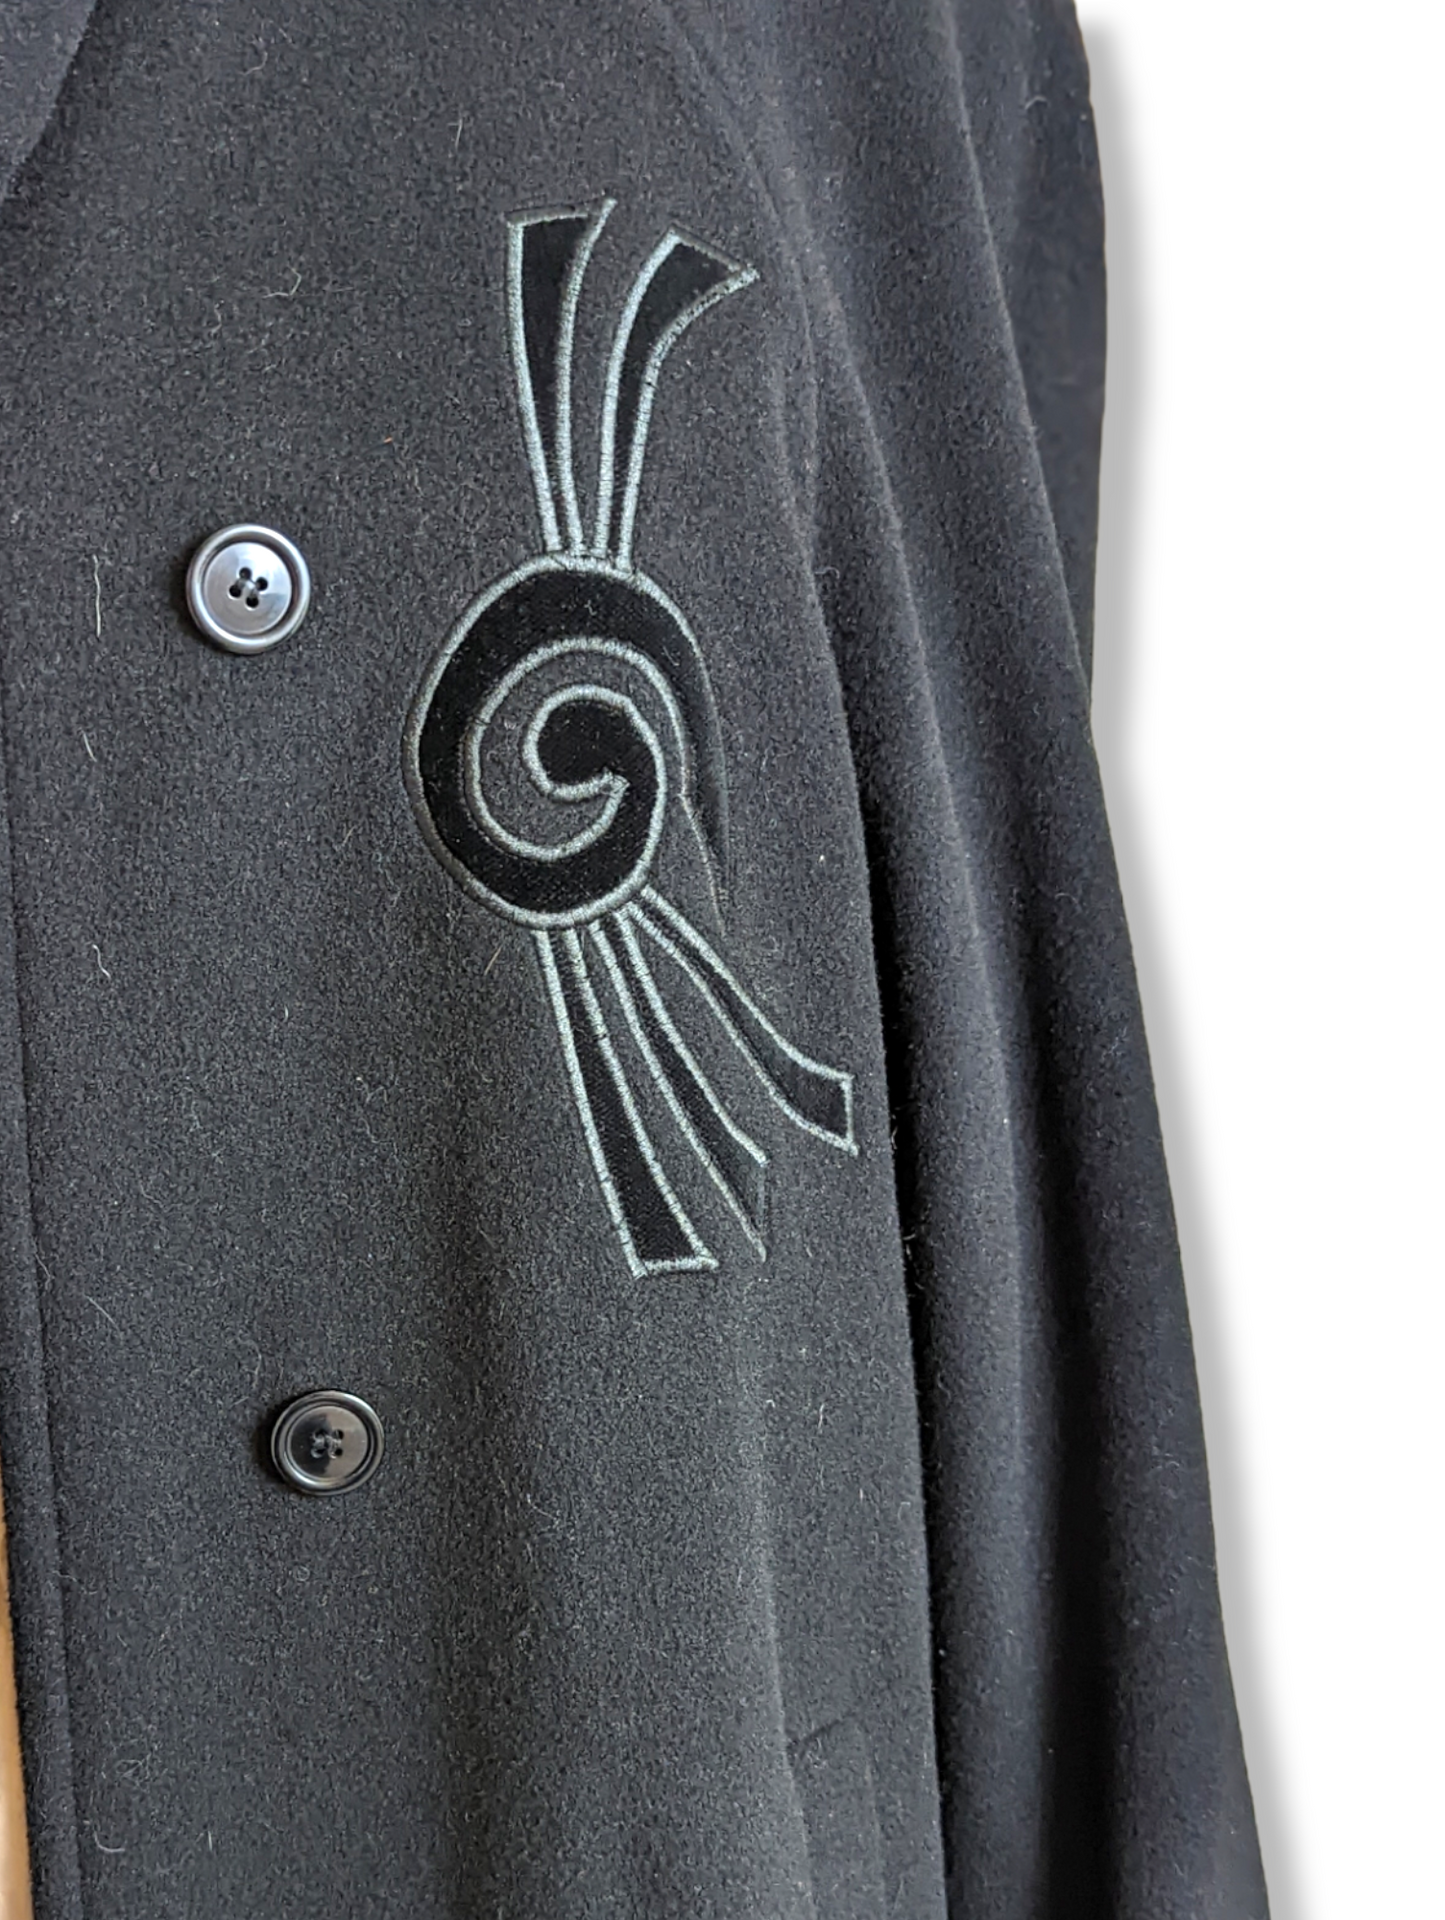 1960s/1970s Black Wool and Cashmere Long Coat with Faux Fur Cuffs and Collar and Velour Velvet Button